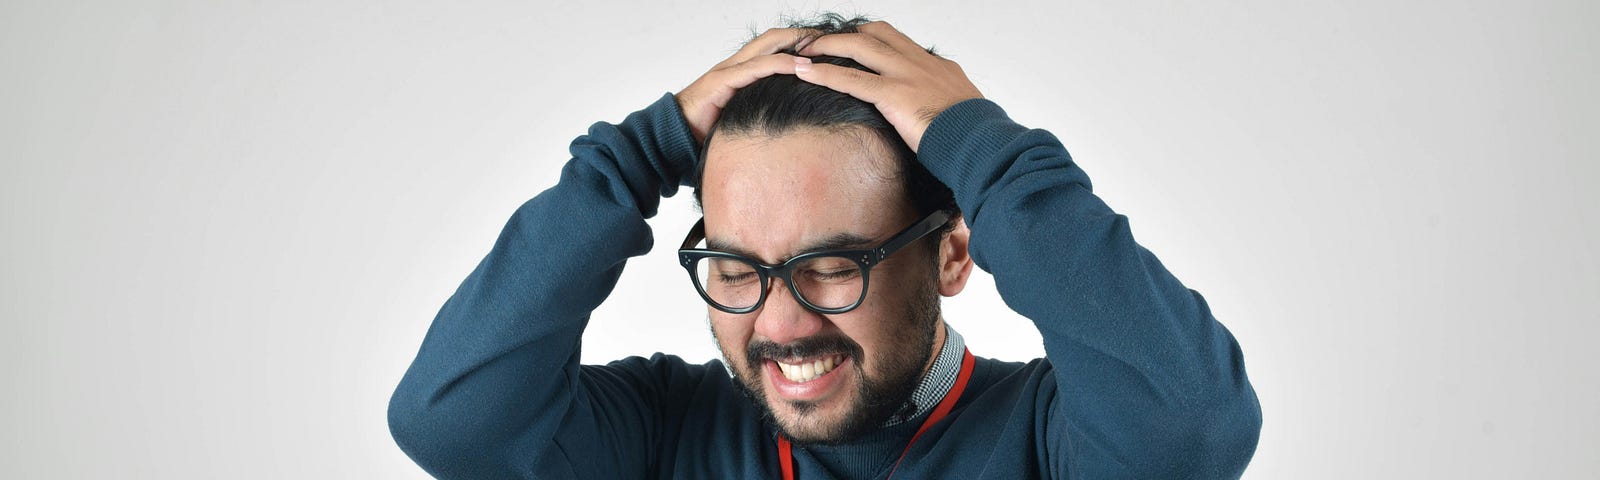 Stressed and anxious man with glasses holding his head